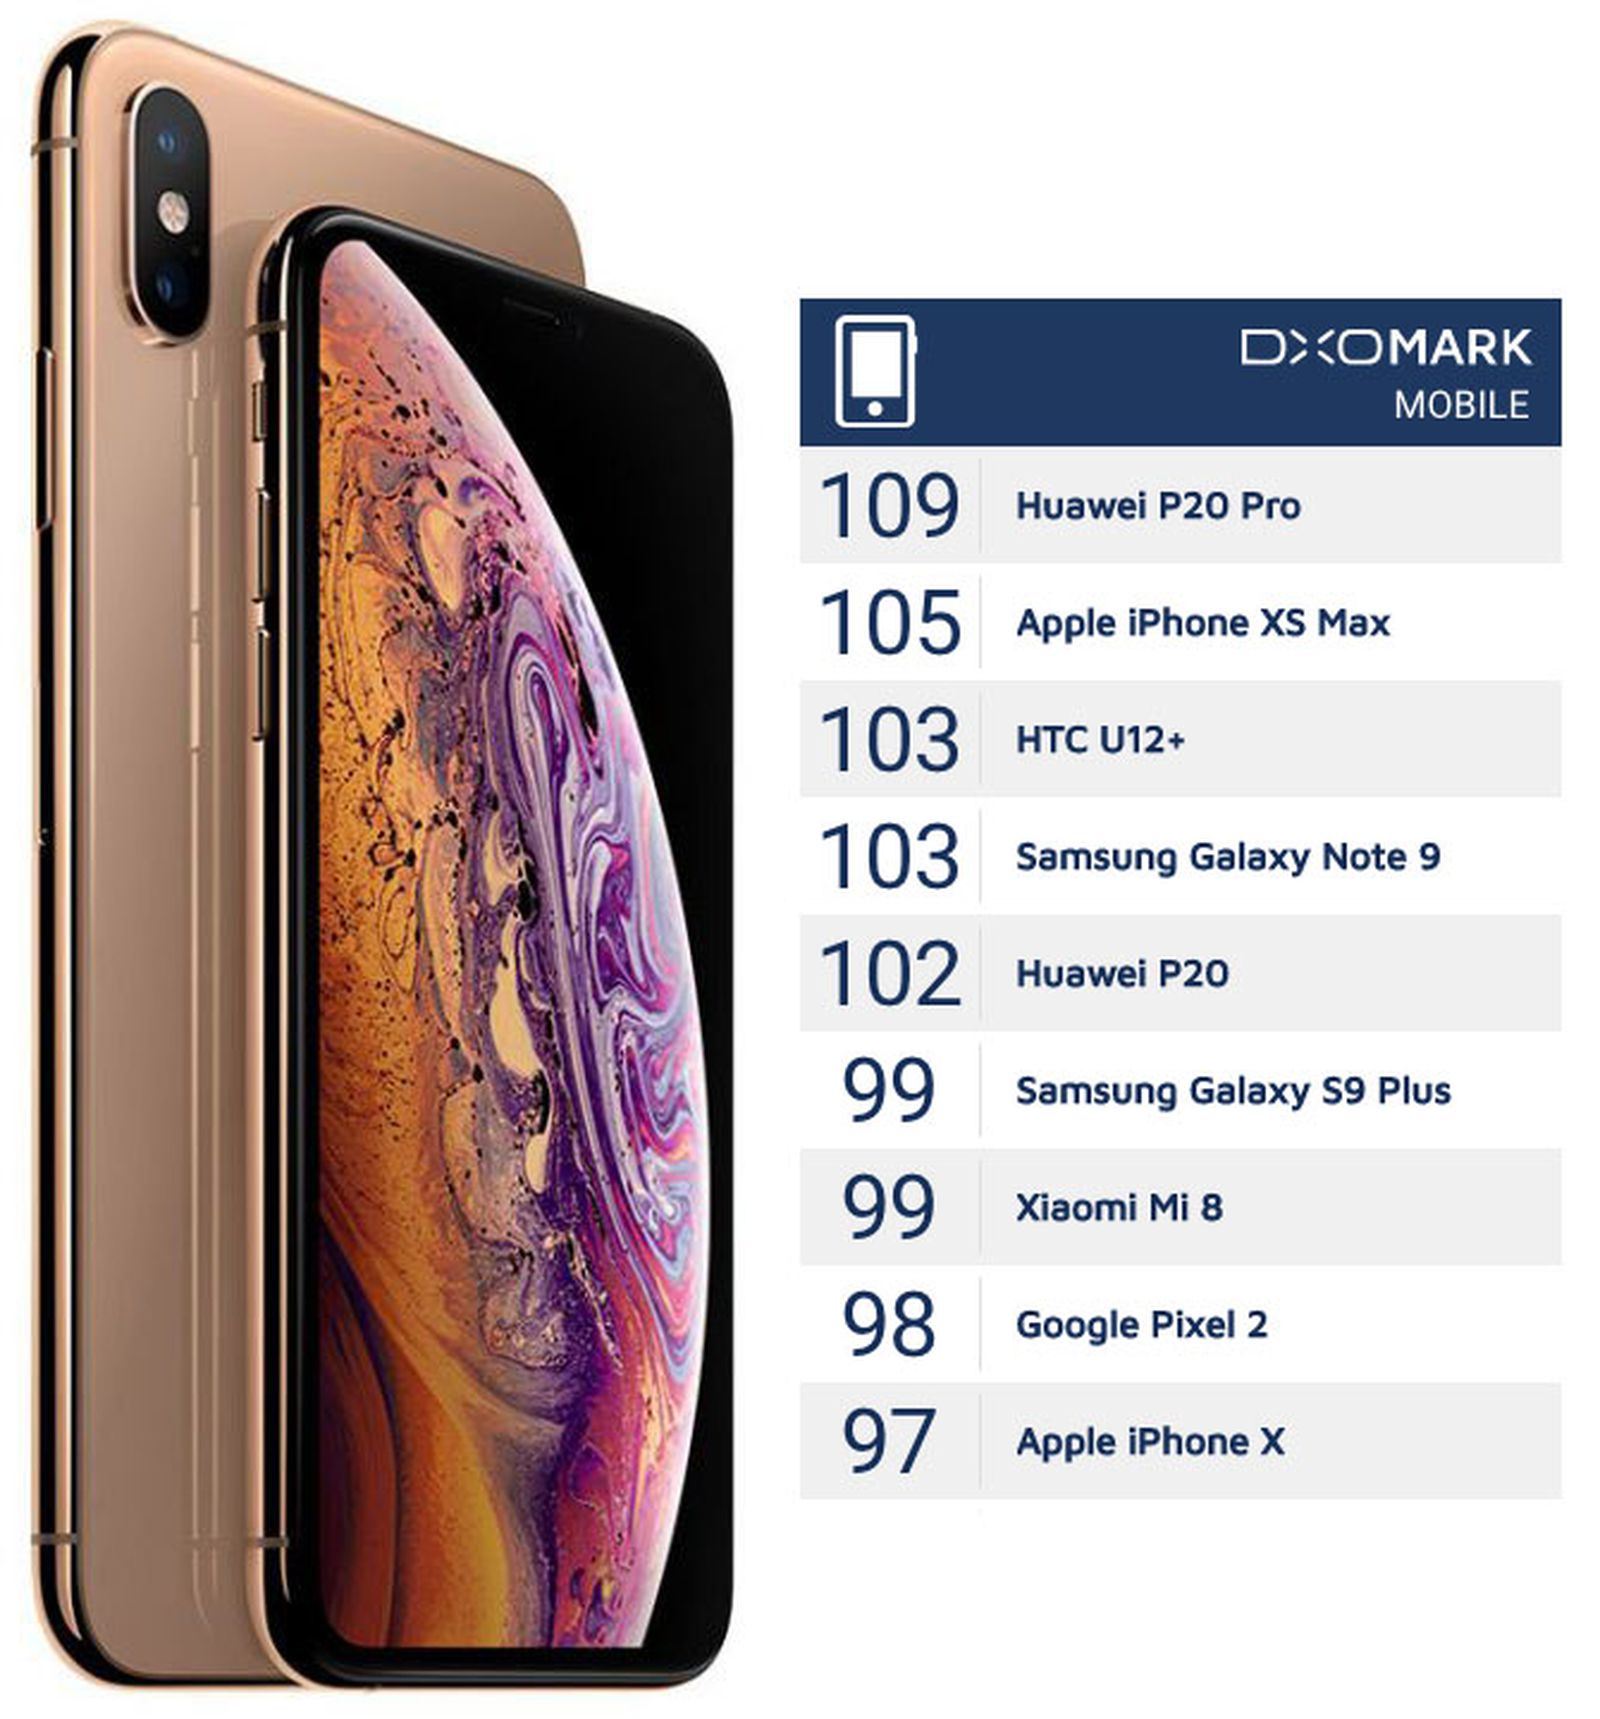 DxOMark: iPhone XS Max is 'Surefire Option' With 'One of the Best